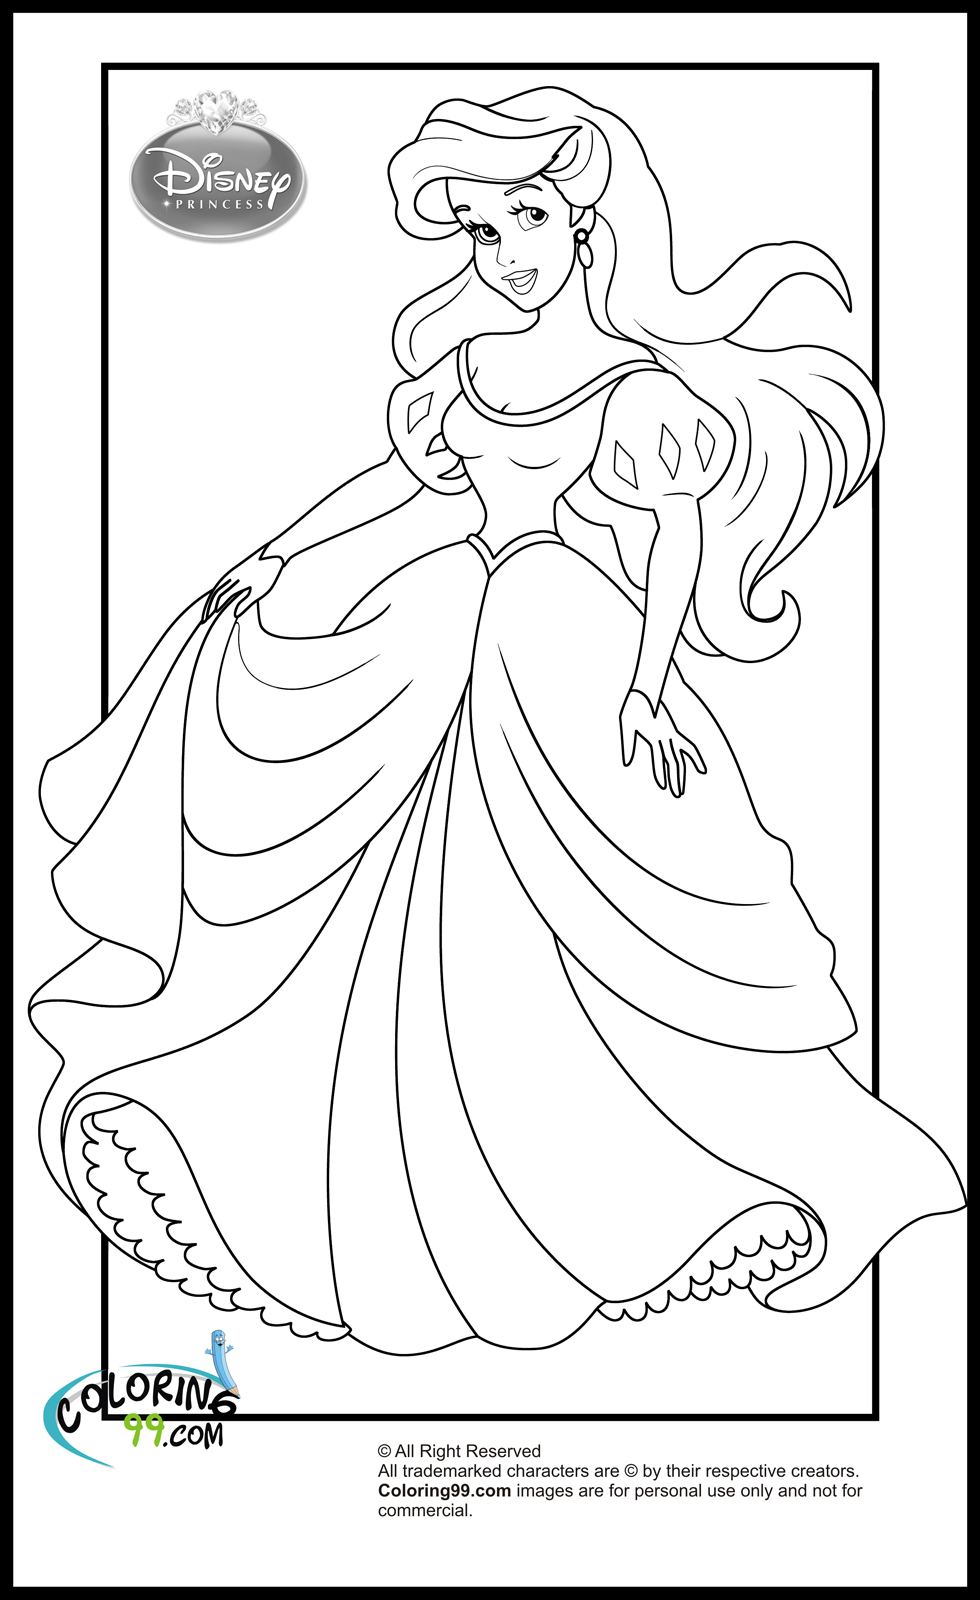 Disney Princess Coloring Pages | Minister Coloring